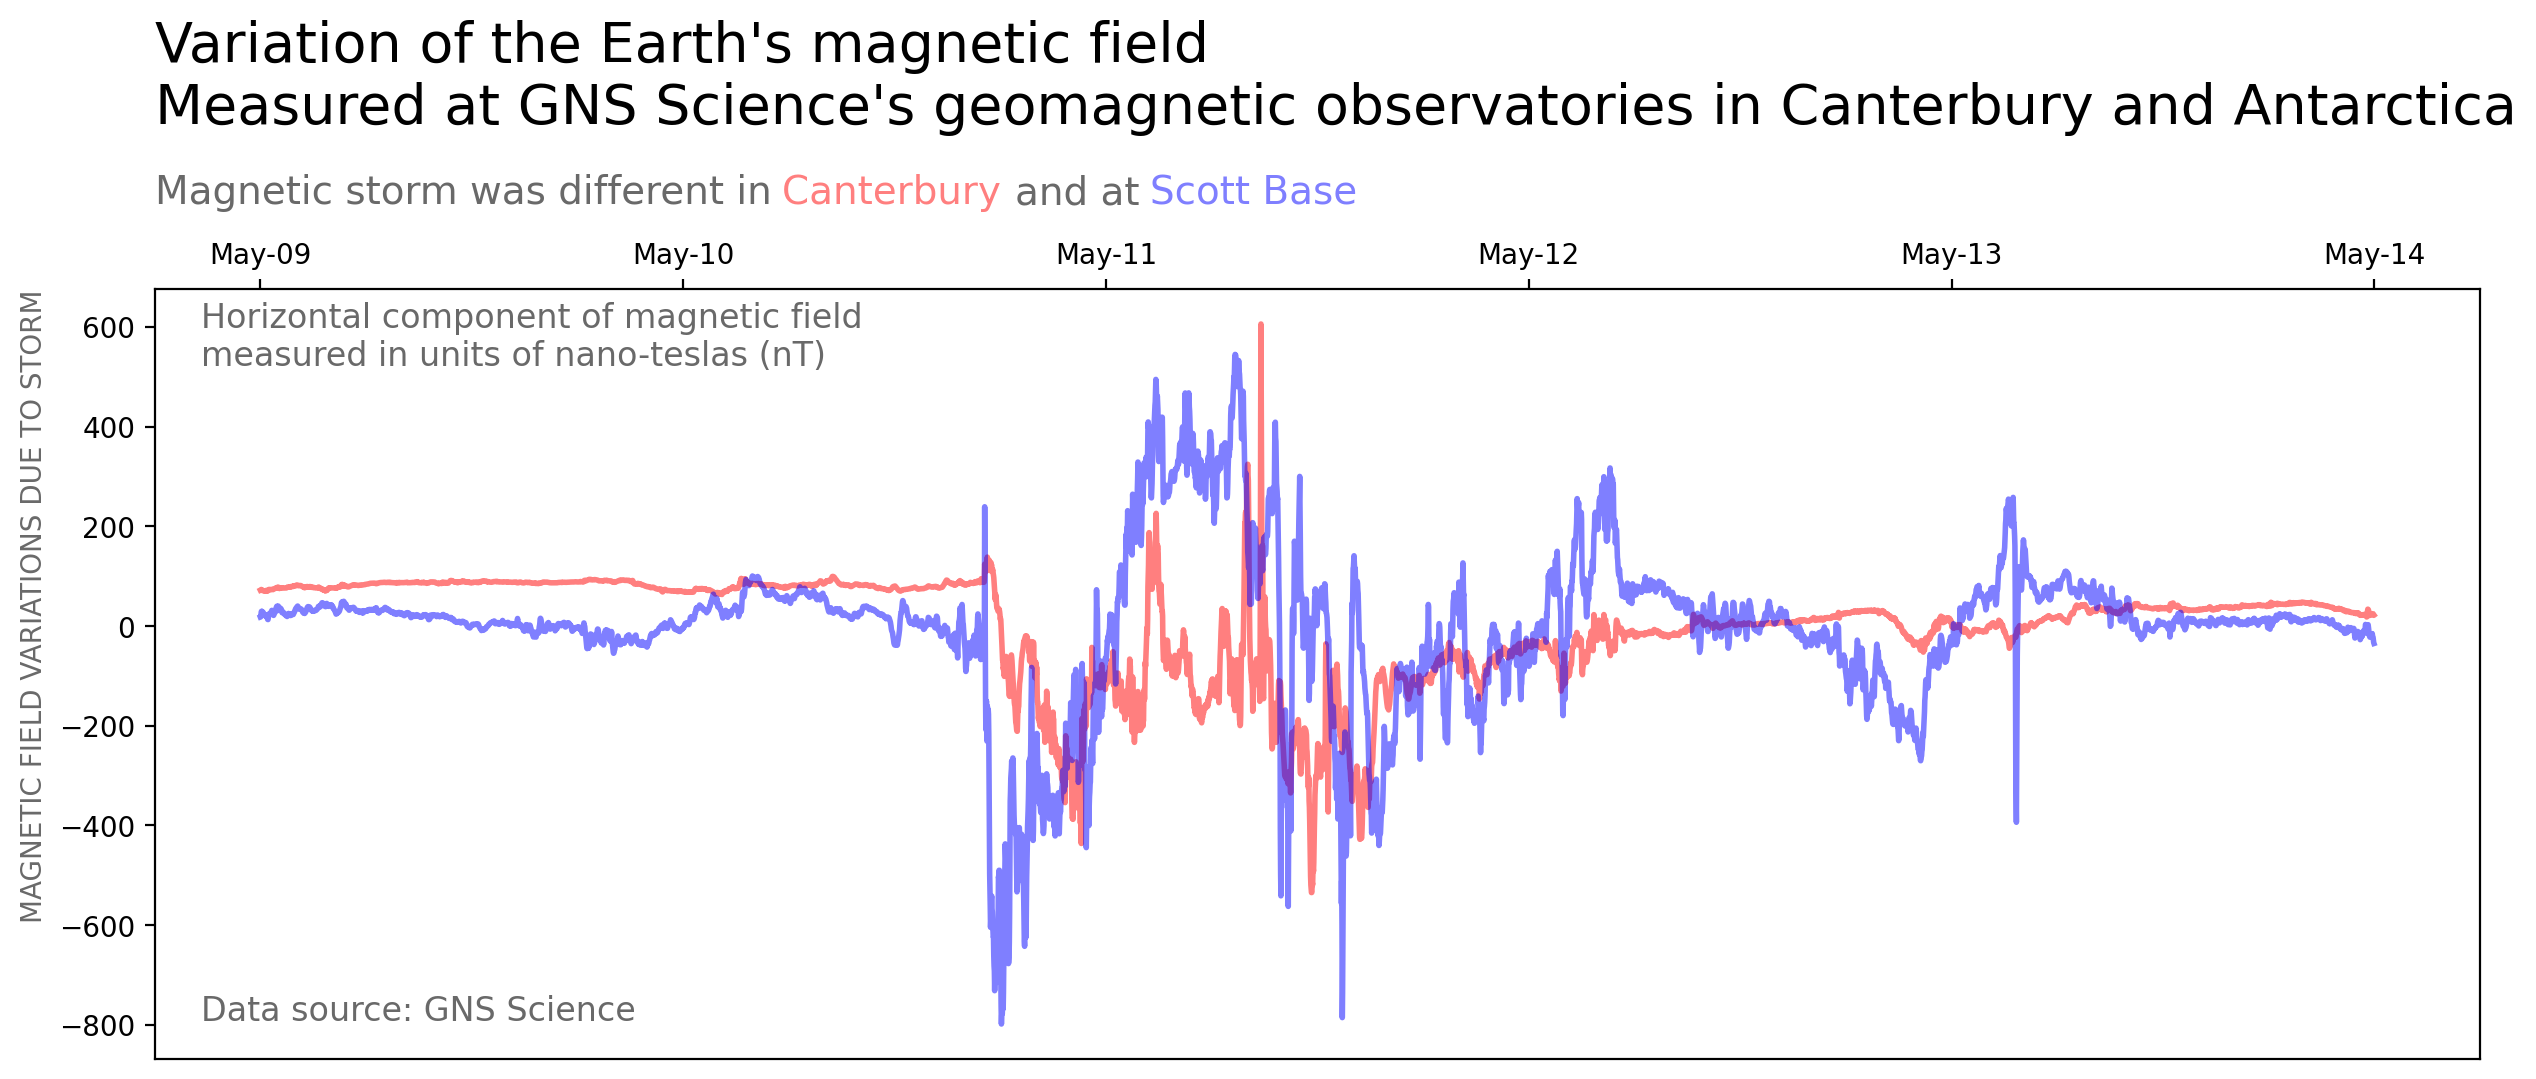 Variations of the earth’s magnetic field observed at Canterbury (red) and Scott Base (blue).